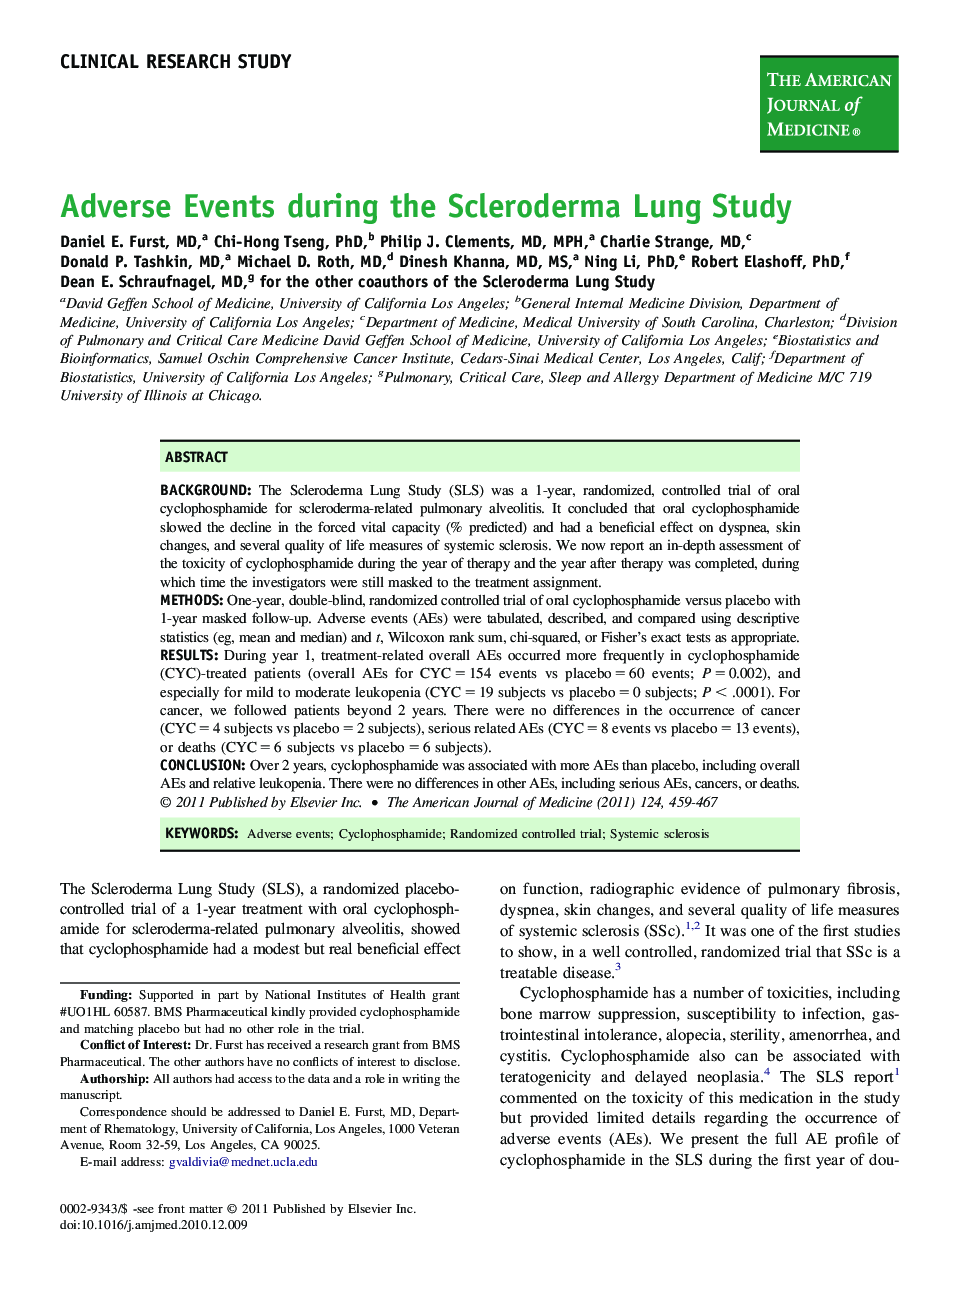 Adverse Events during the Scleroderma Lung Study 